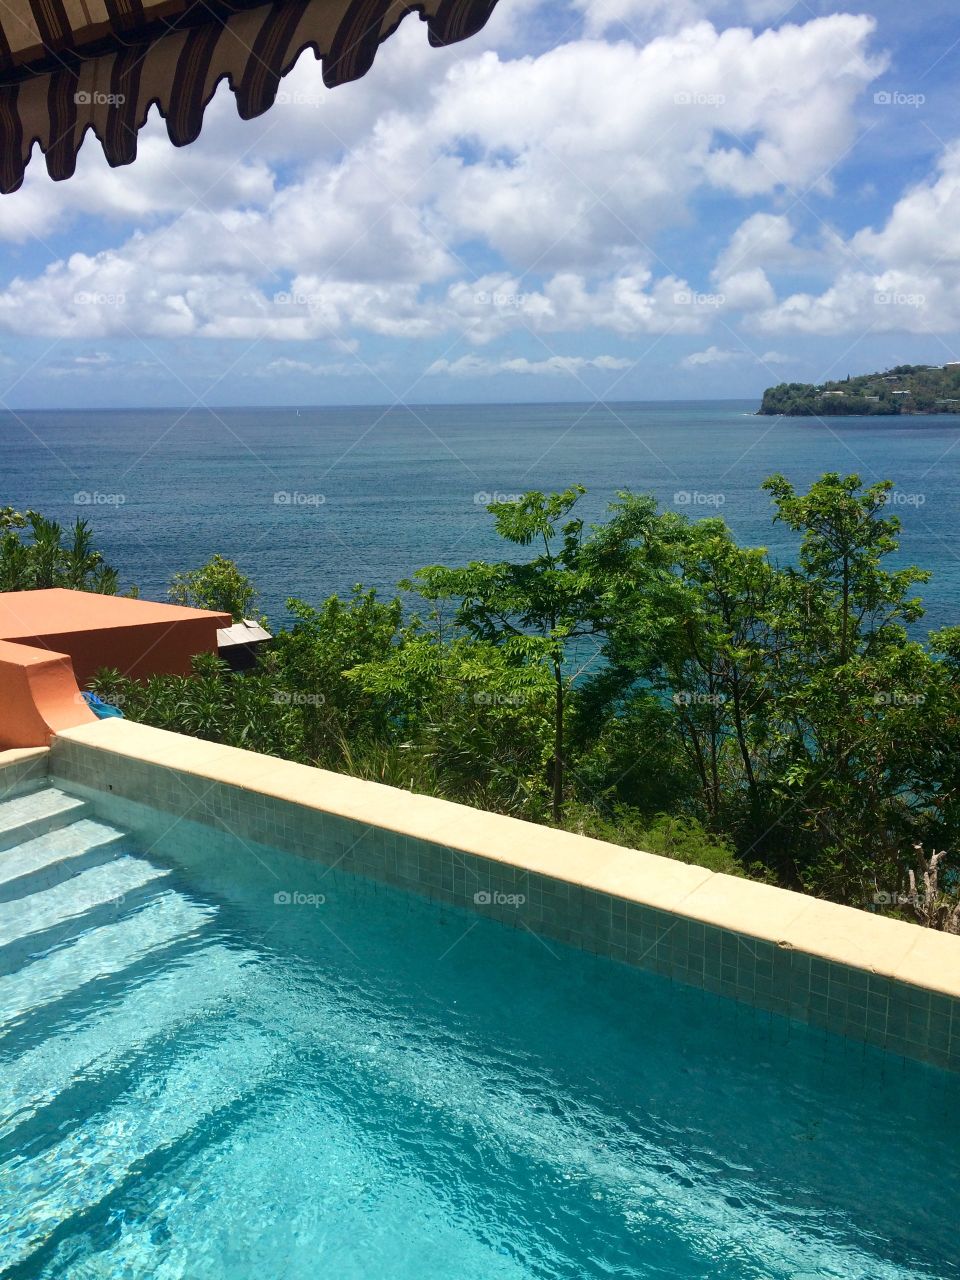 The amazing view from the edge of the private infinity pool of our suite at the Sandals Resort overlooking the stunning ocean water in St. Lucia. 